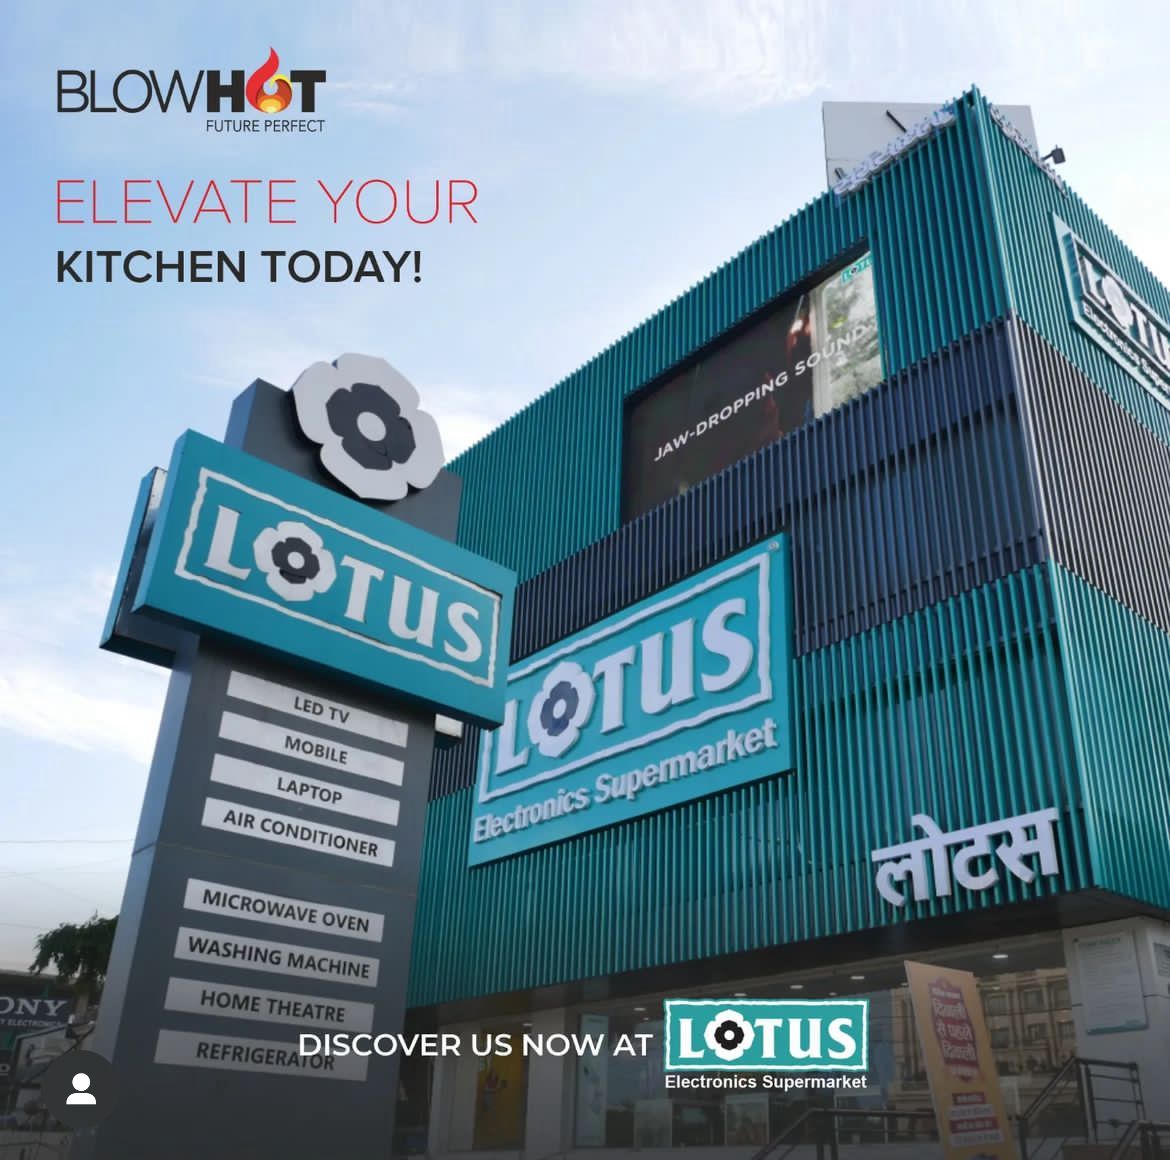 Lotus Electronics adapted its online strategy to meet consumer needs